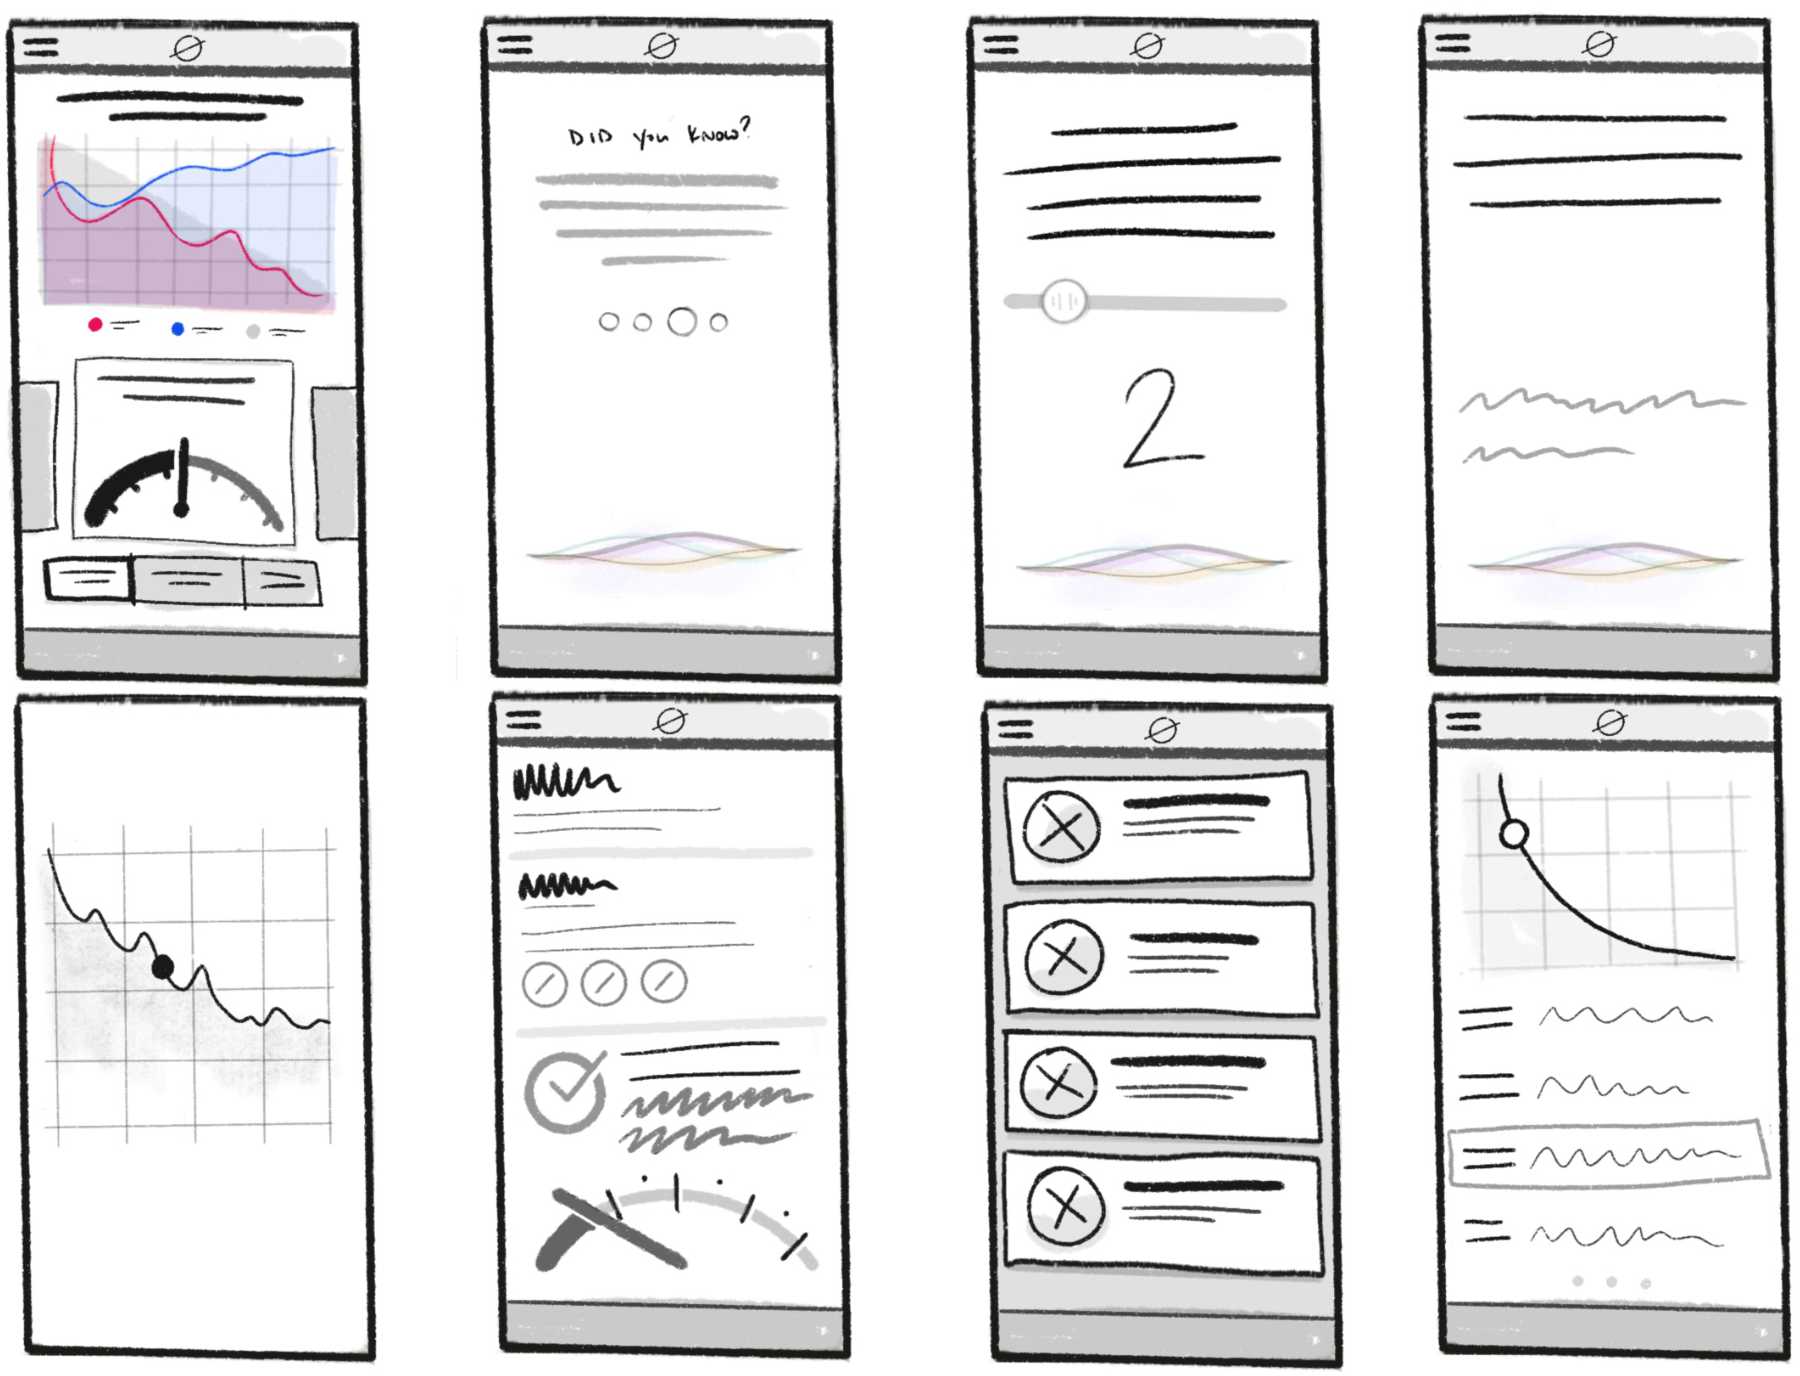 sketches of a future app interface and various screens